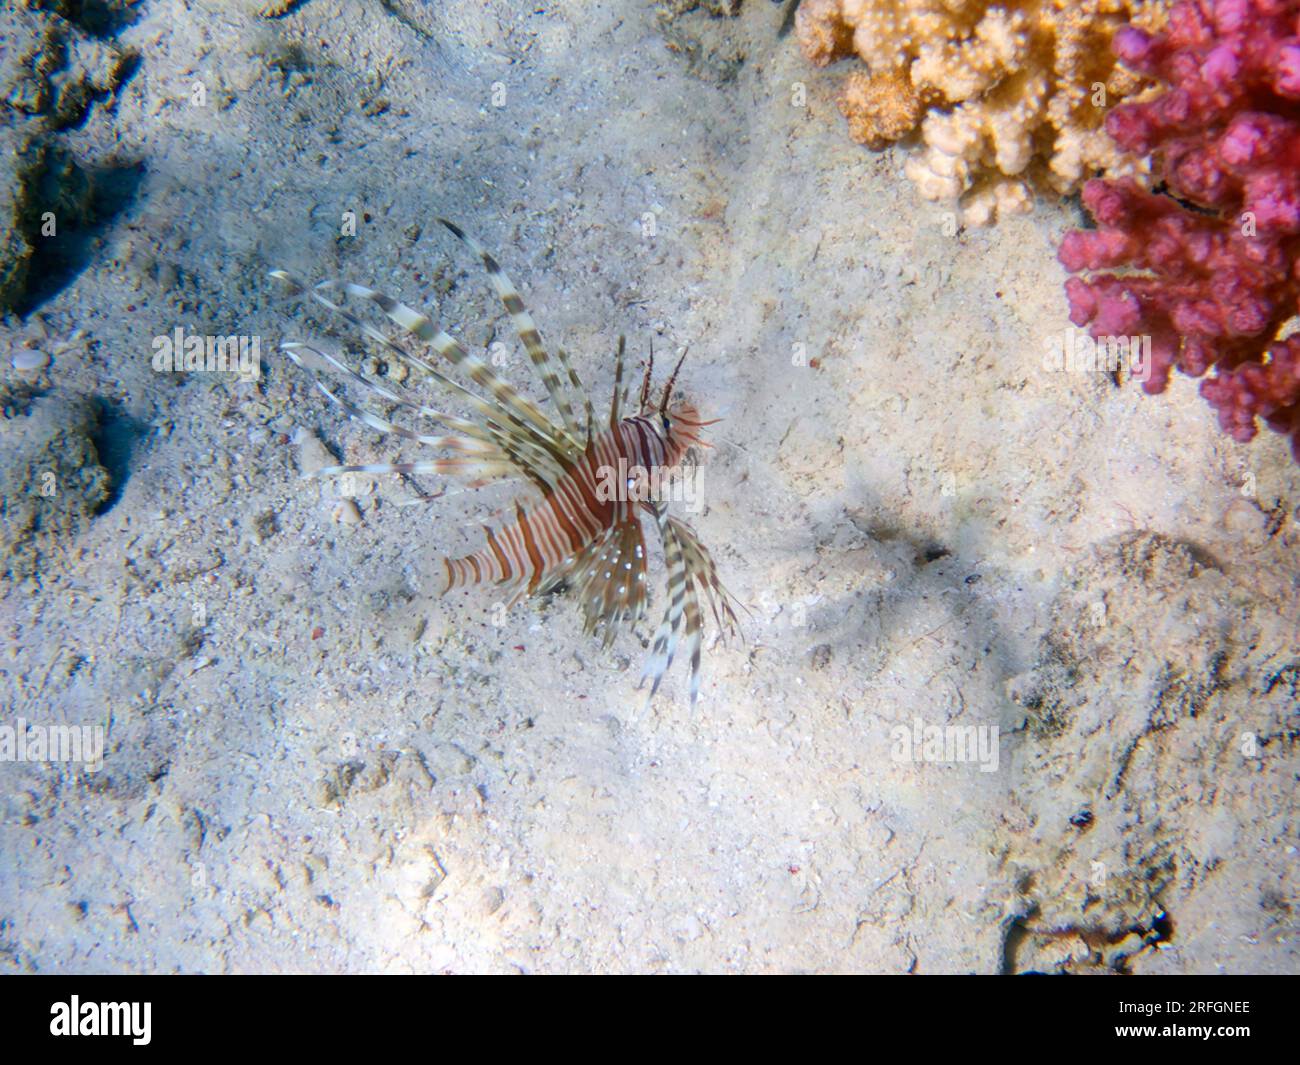 Lionfish (Pterois volitans) in the Red Sea, underwater photography Stock Photo